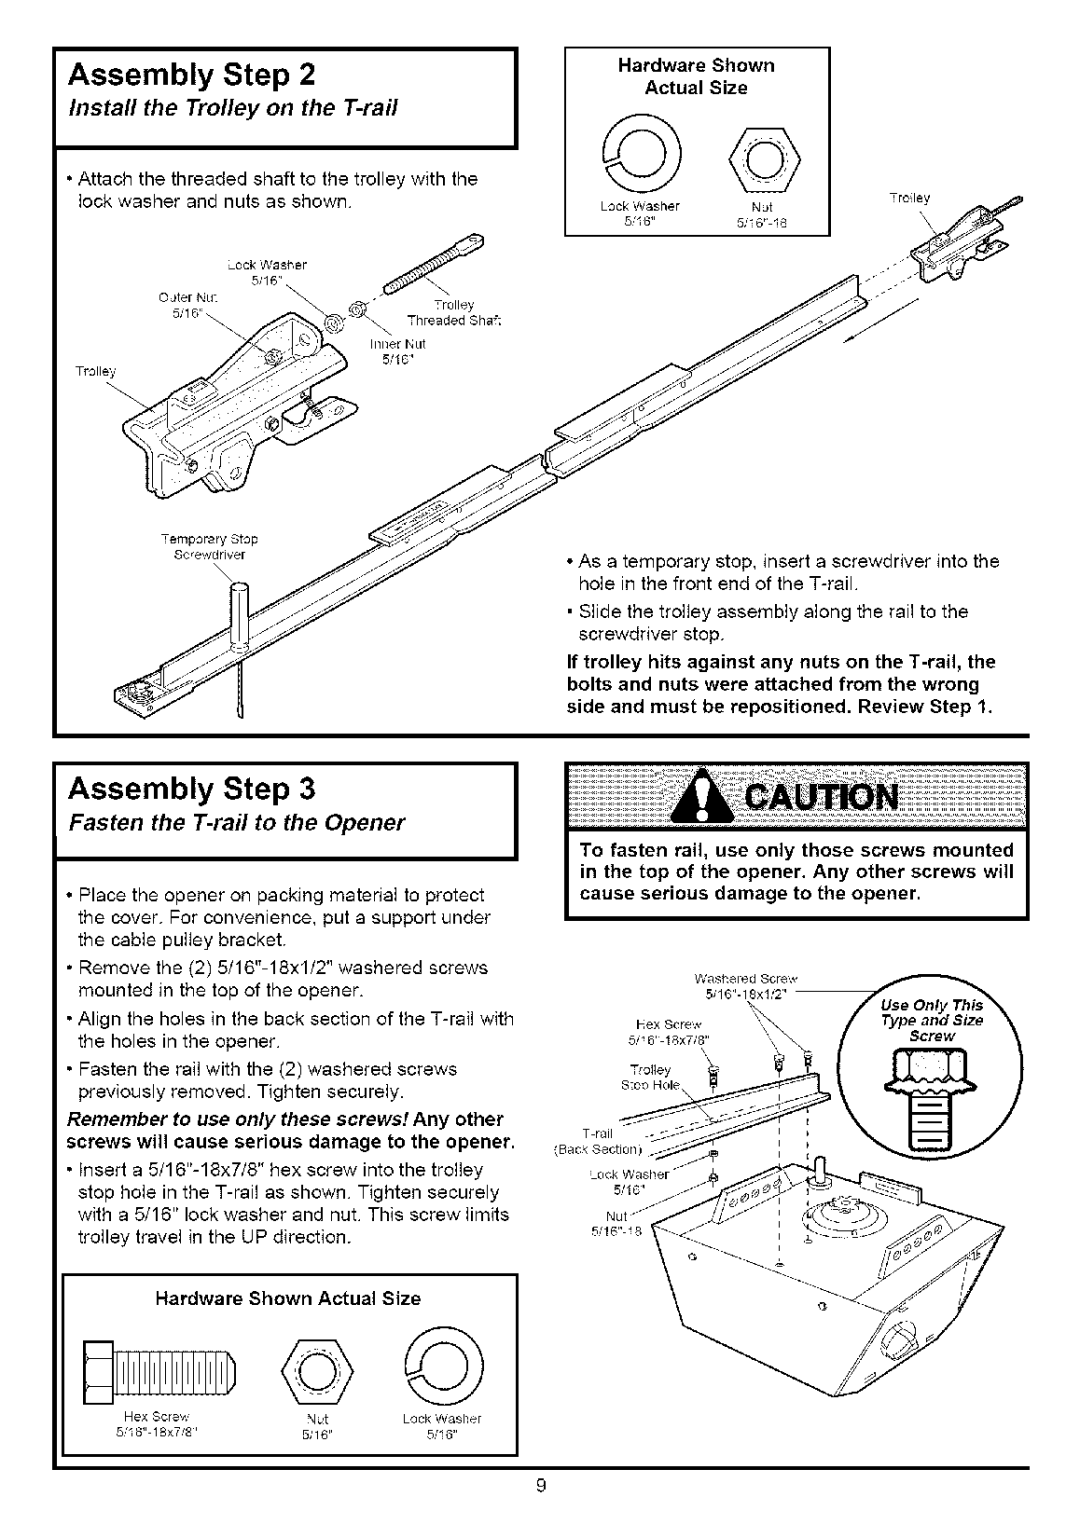 Sears 139.53627SRT, 139.53636SRT Assembly Step, Install the Trolley on the T-rail, Fasten the T-rail to the Opener 